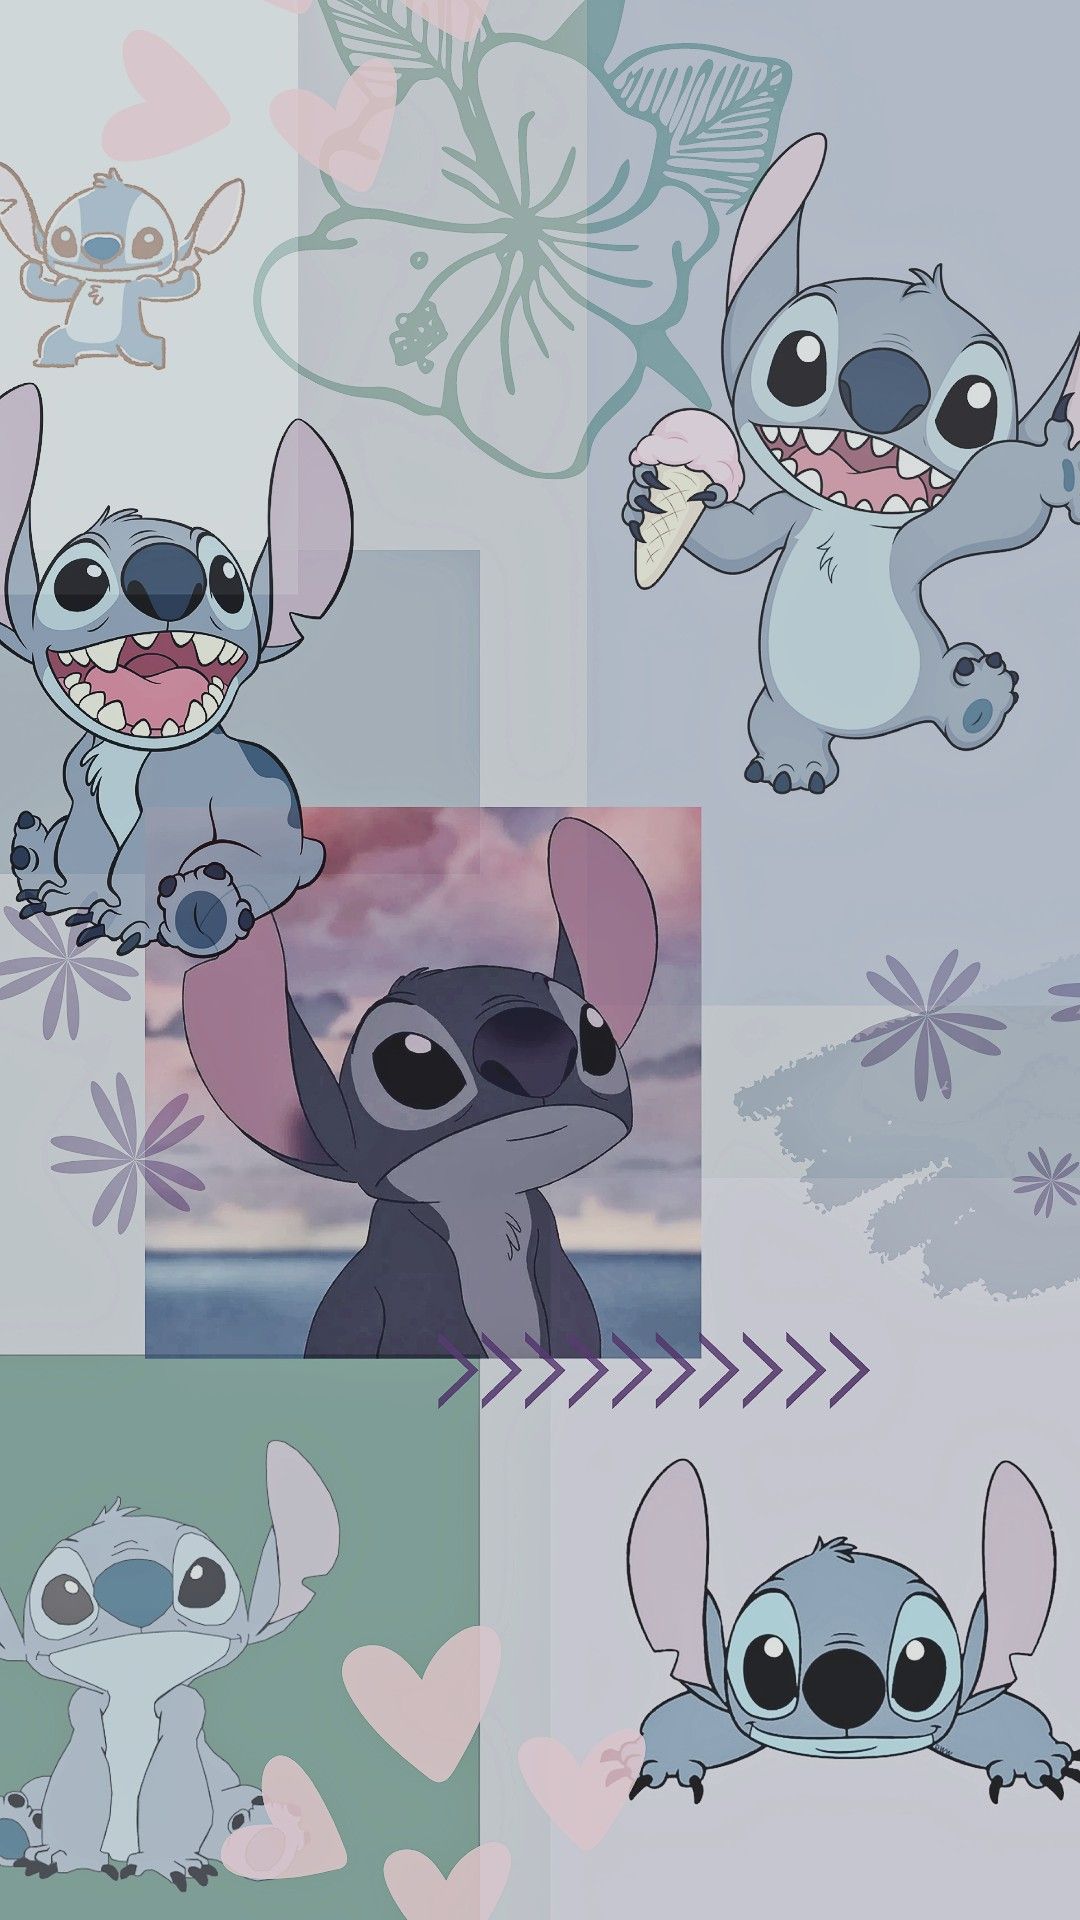 A collage of stitch and other characters - Stitch